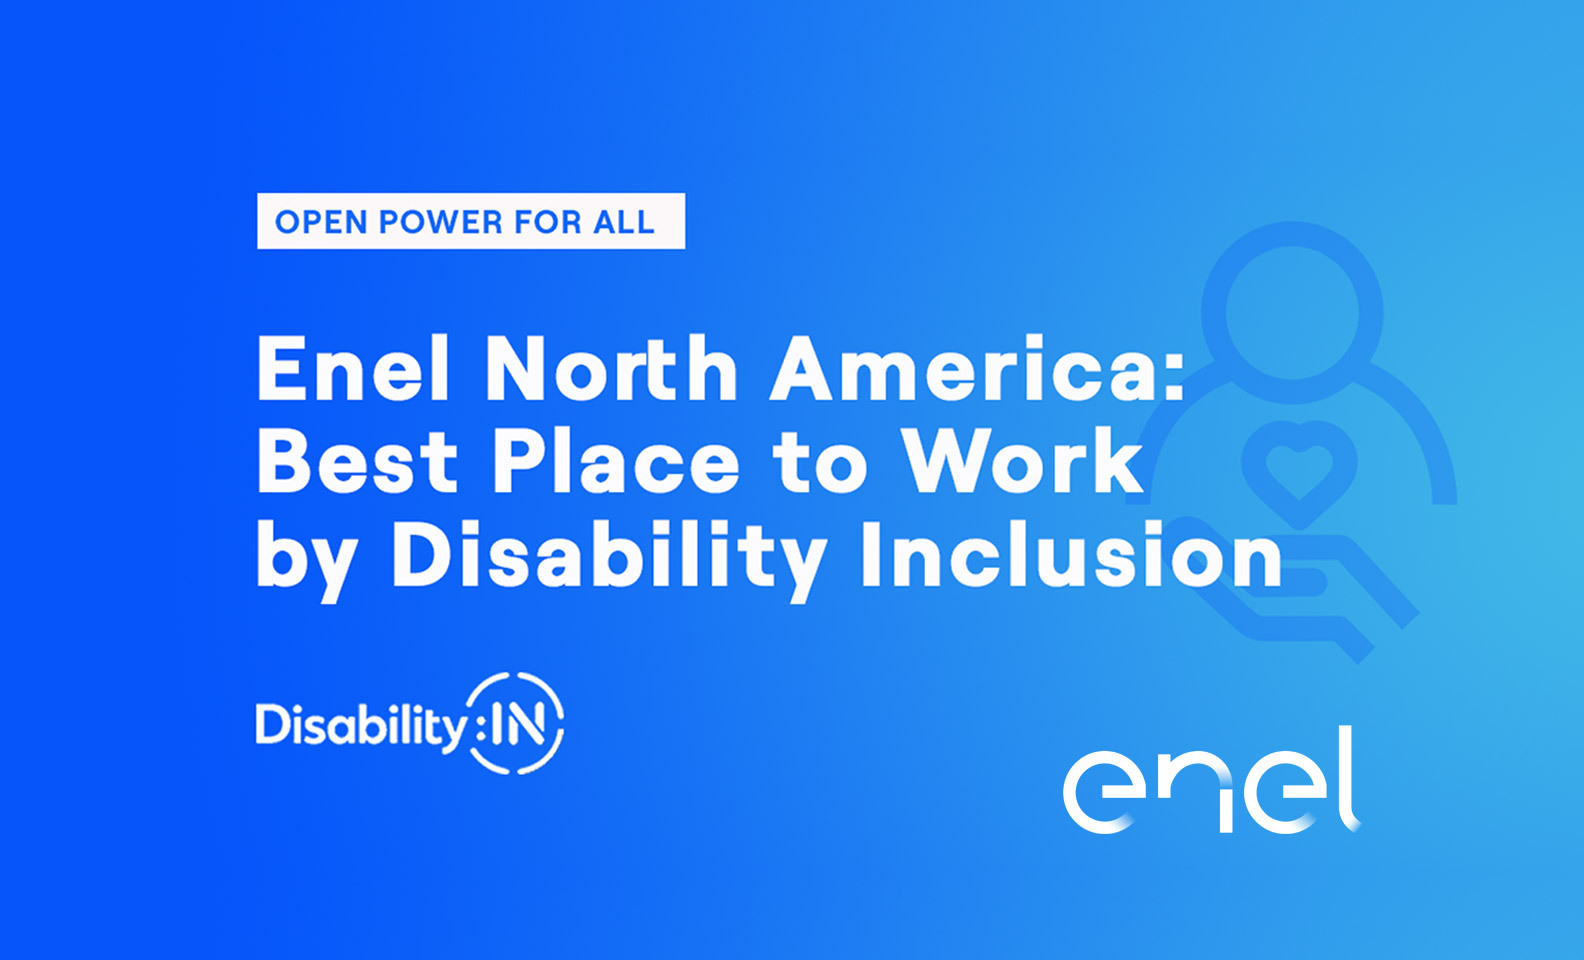 https://www.enel.com/content/dam/enel-com/immagini/horizontal-media_1584x960/enel-best-place-work-disability-inclusion_1584x960.jpg